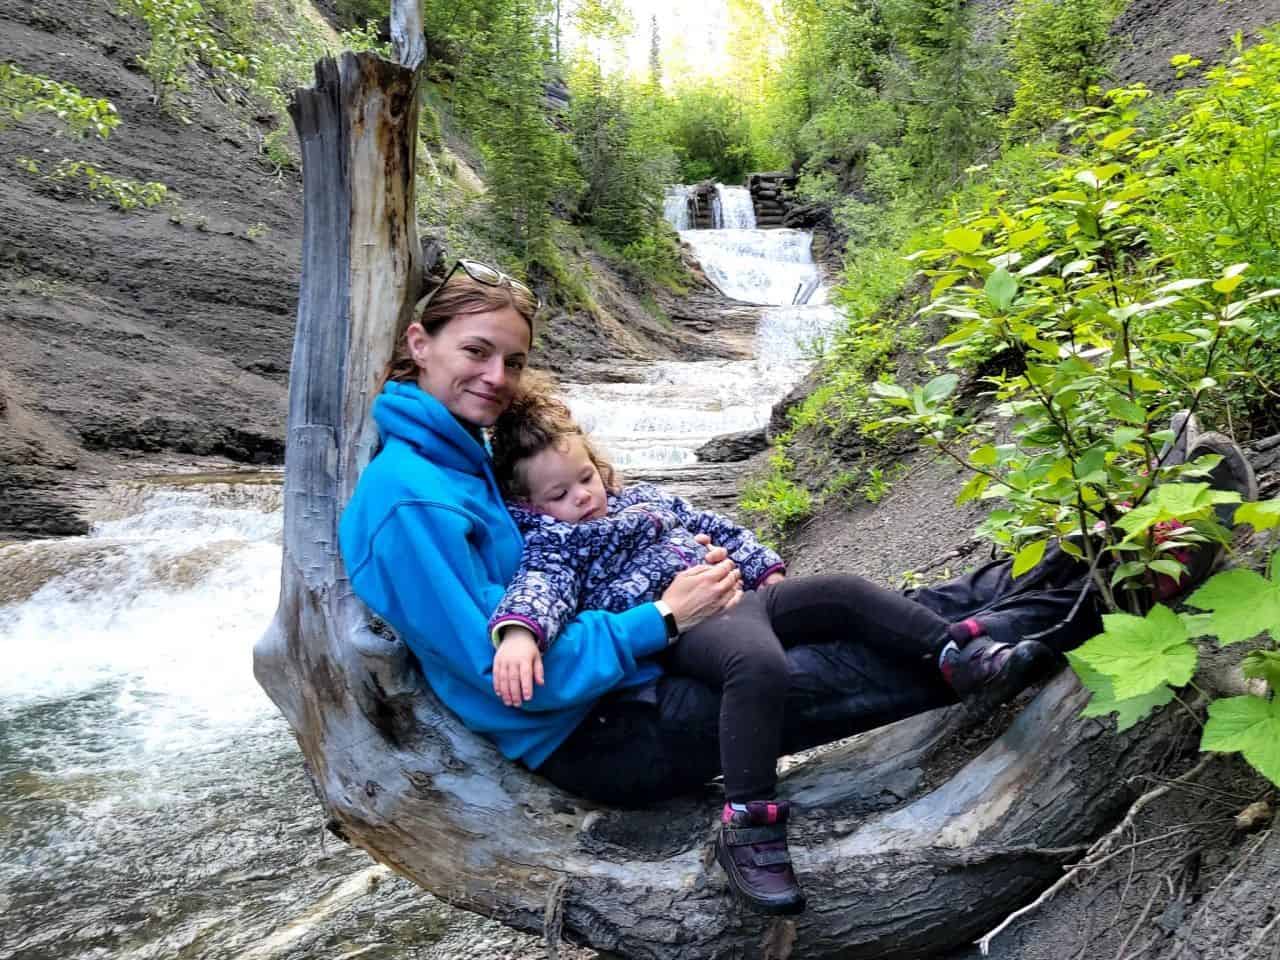 Family time at Allison Creek Falls in the Crowsnest Pass in Southern Alberta Canada.